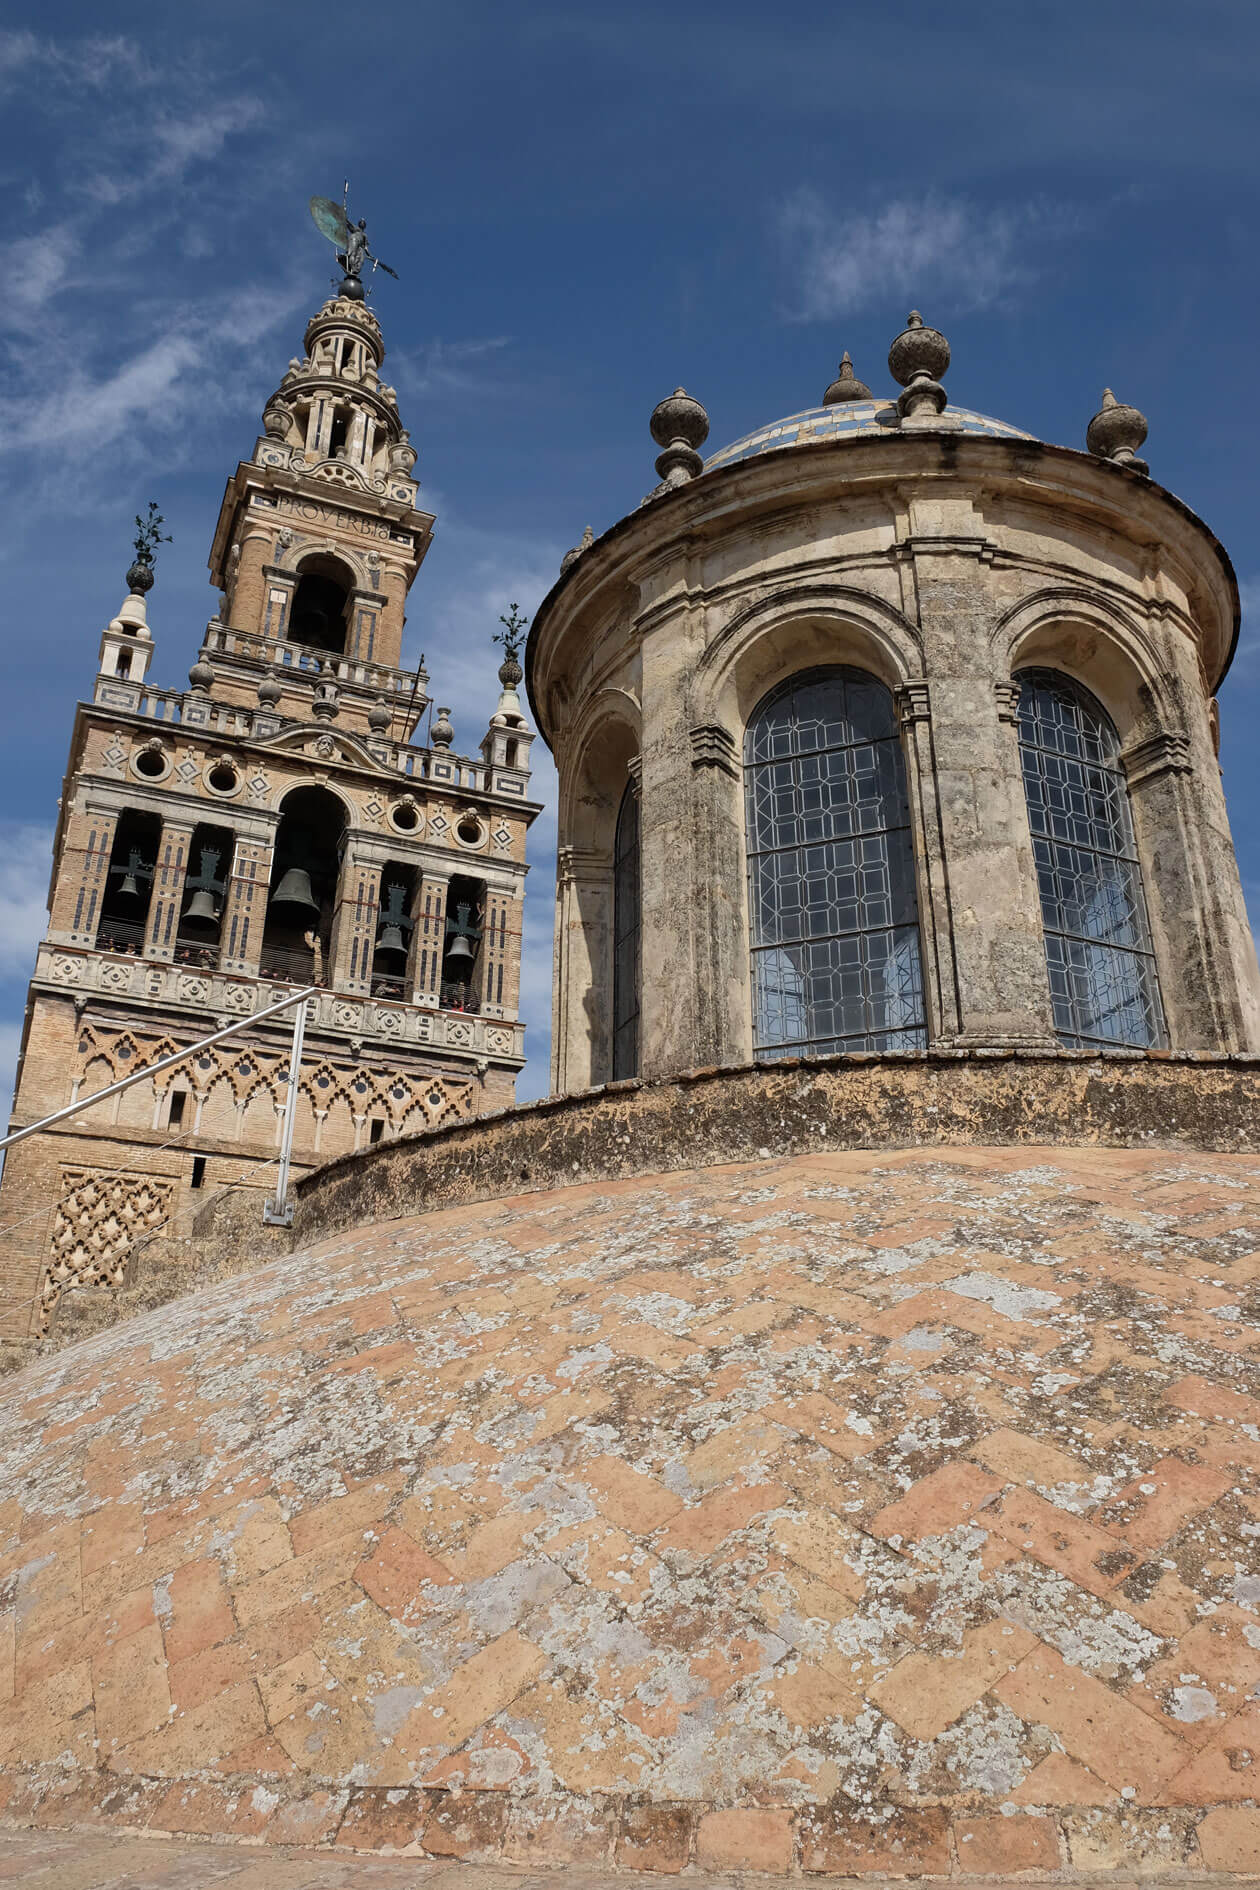 The dome of one of the cathedral's chapels and the Giralda bell tower